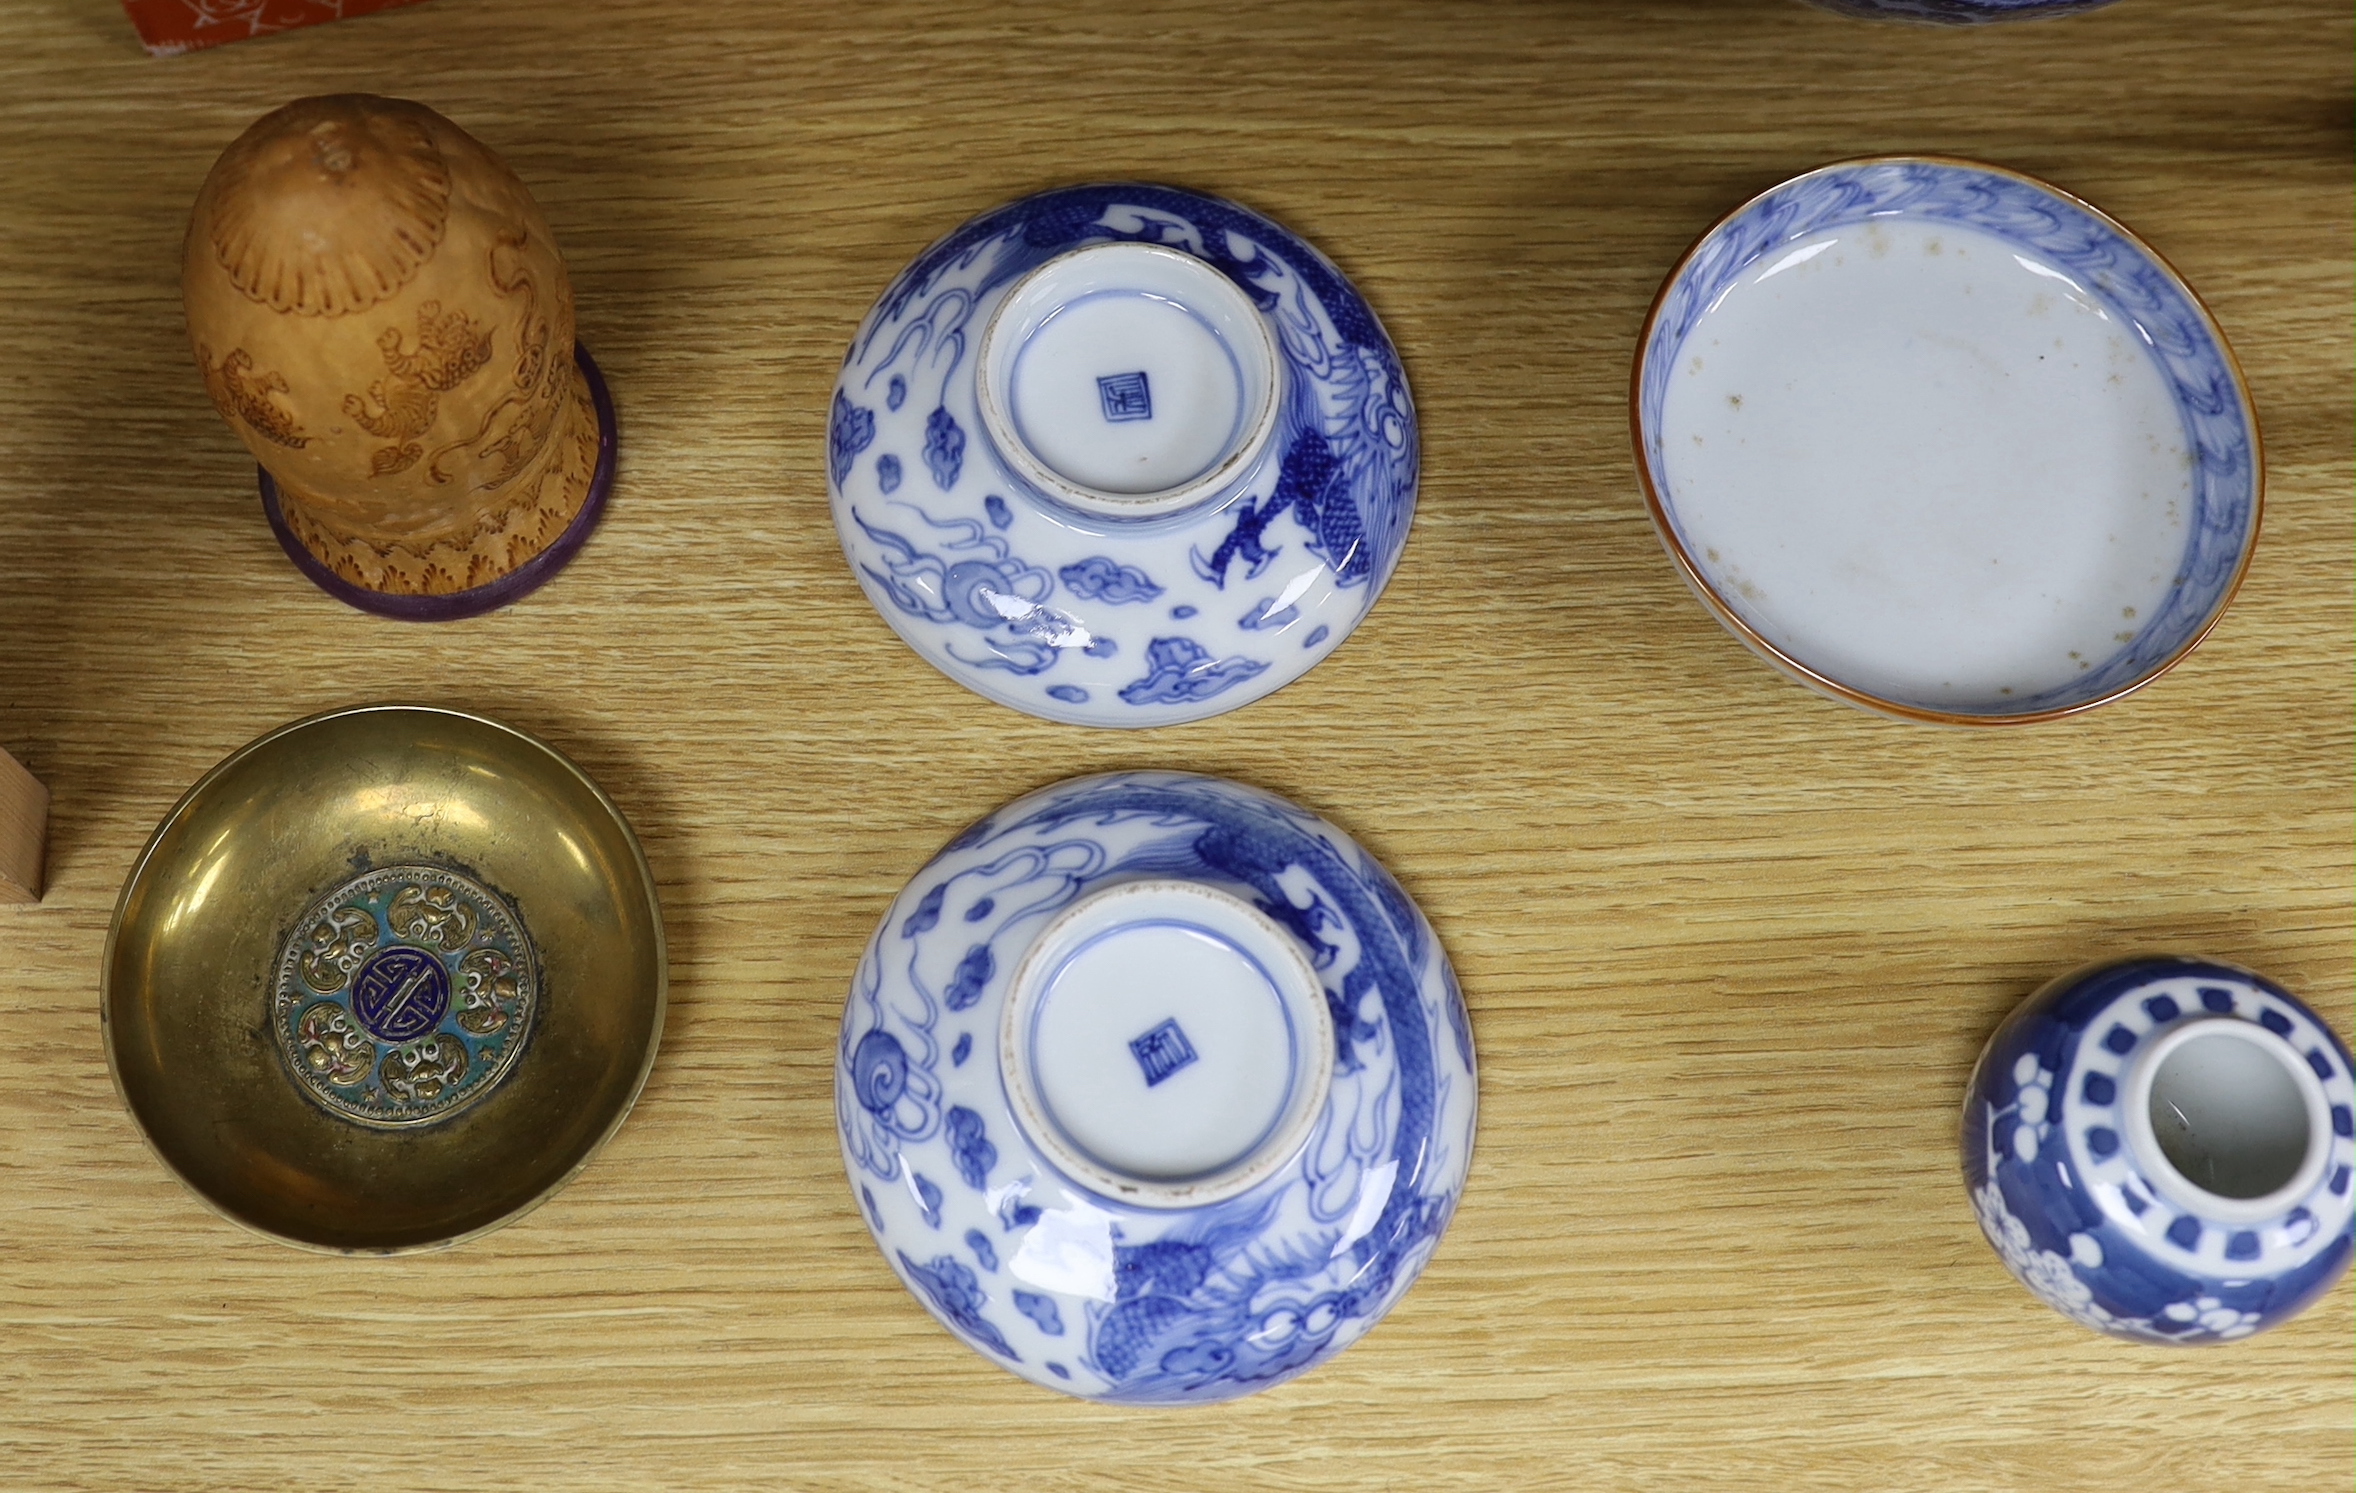 A group of Chinese and Japanese ceramics and objects, 19th/20th century, including an Imari bowl, - Image 2 of 7